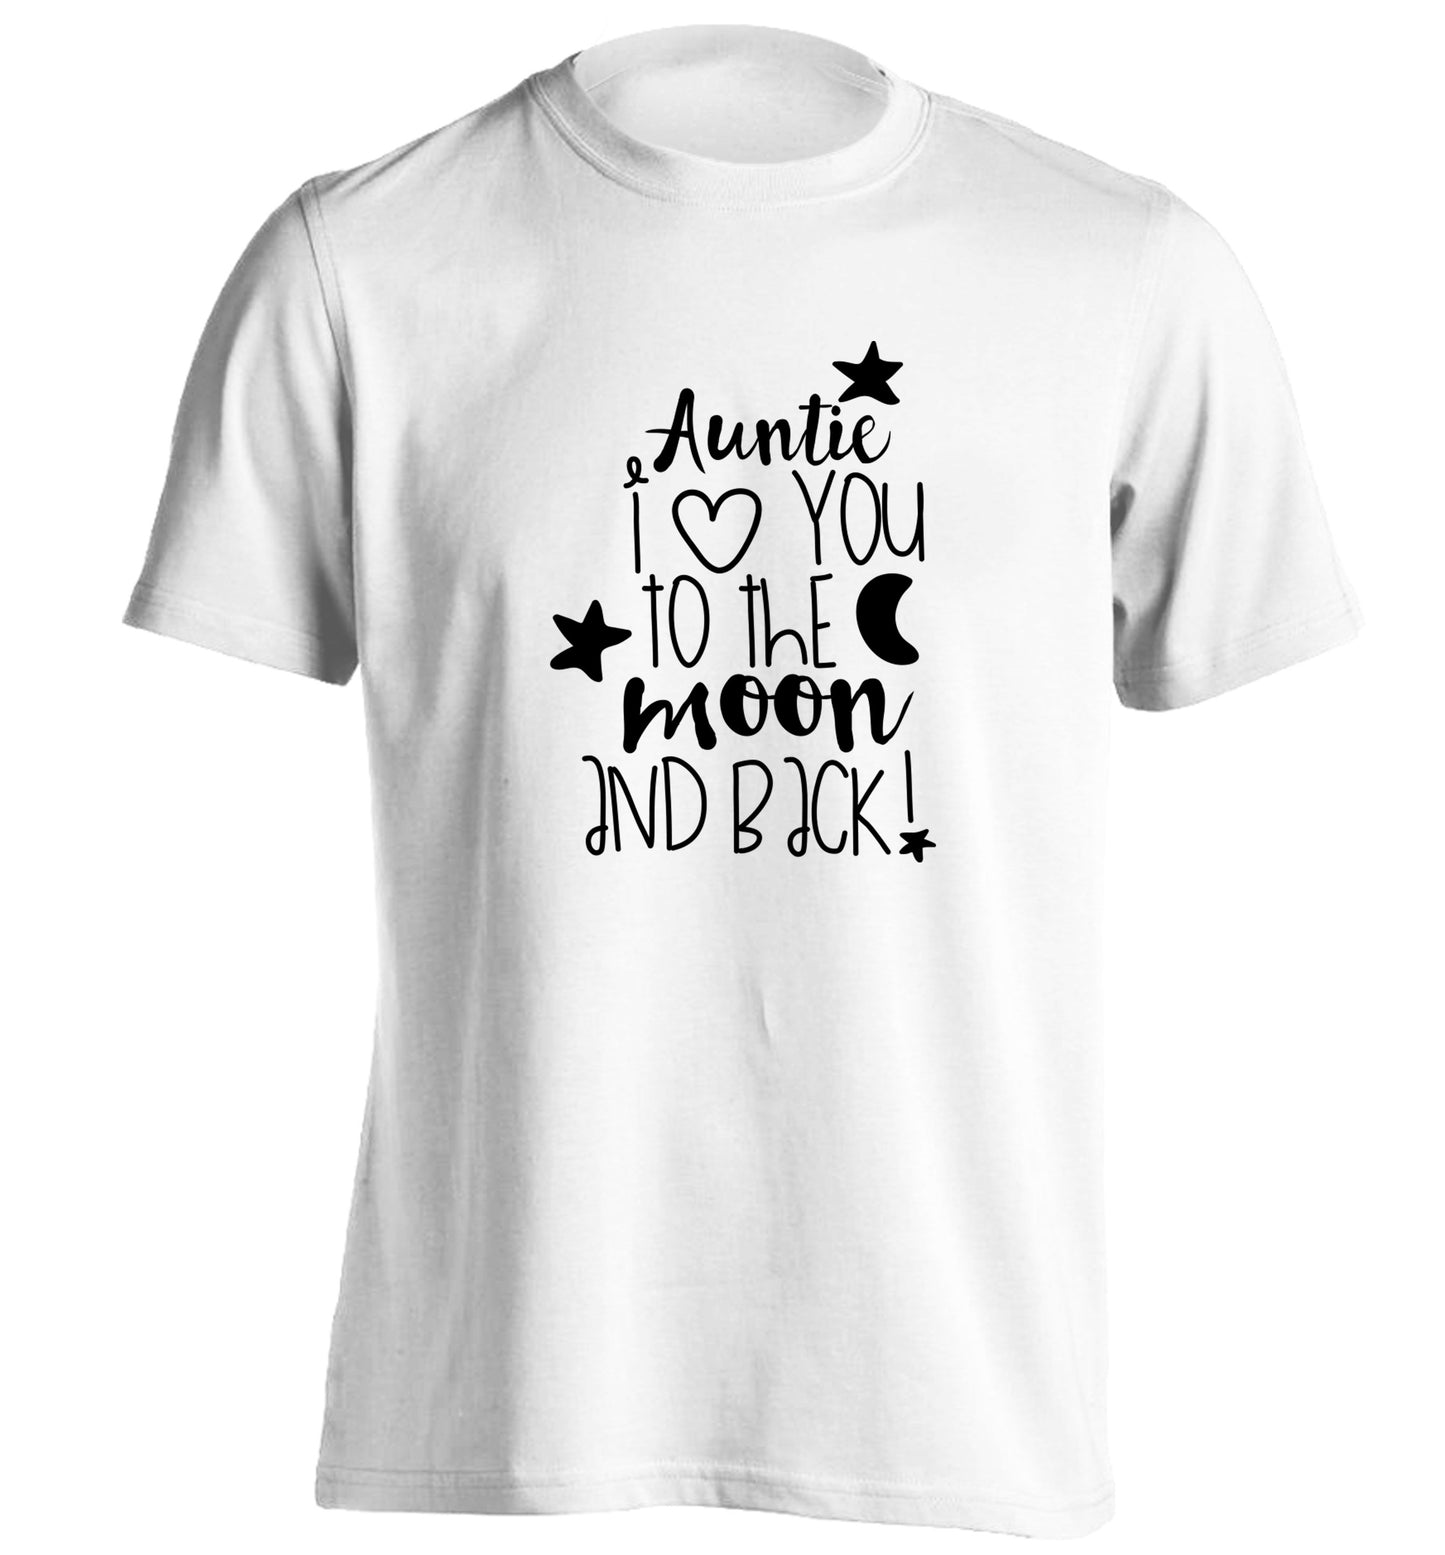 Auntie I love you to the moon and back adults unisex white Tshirt 2XL